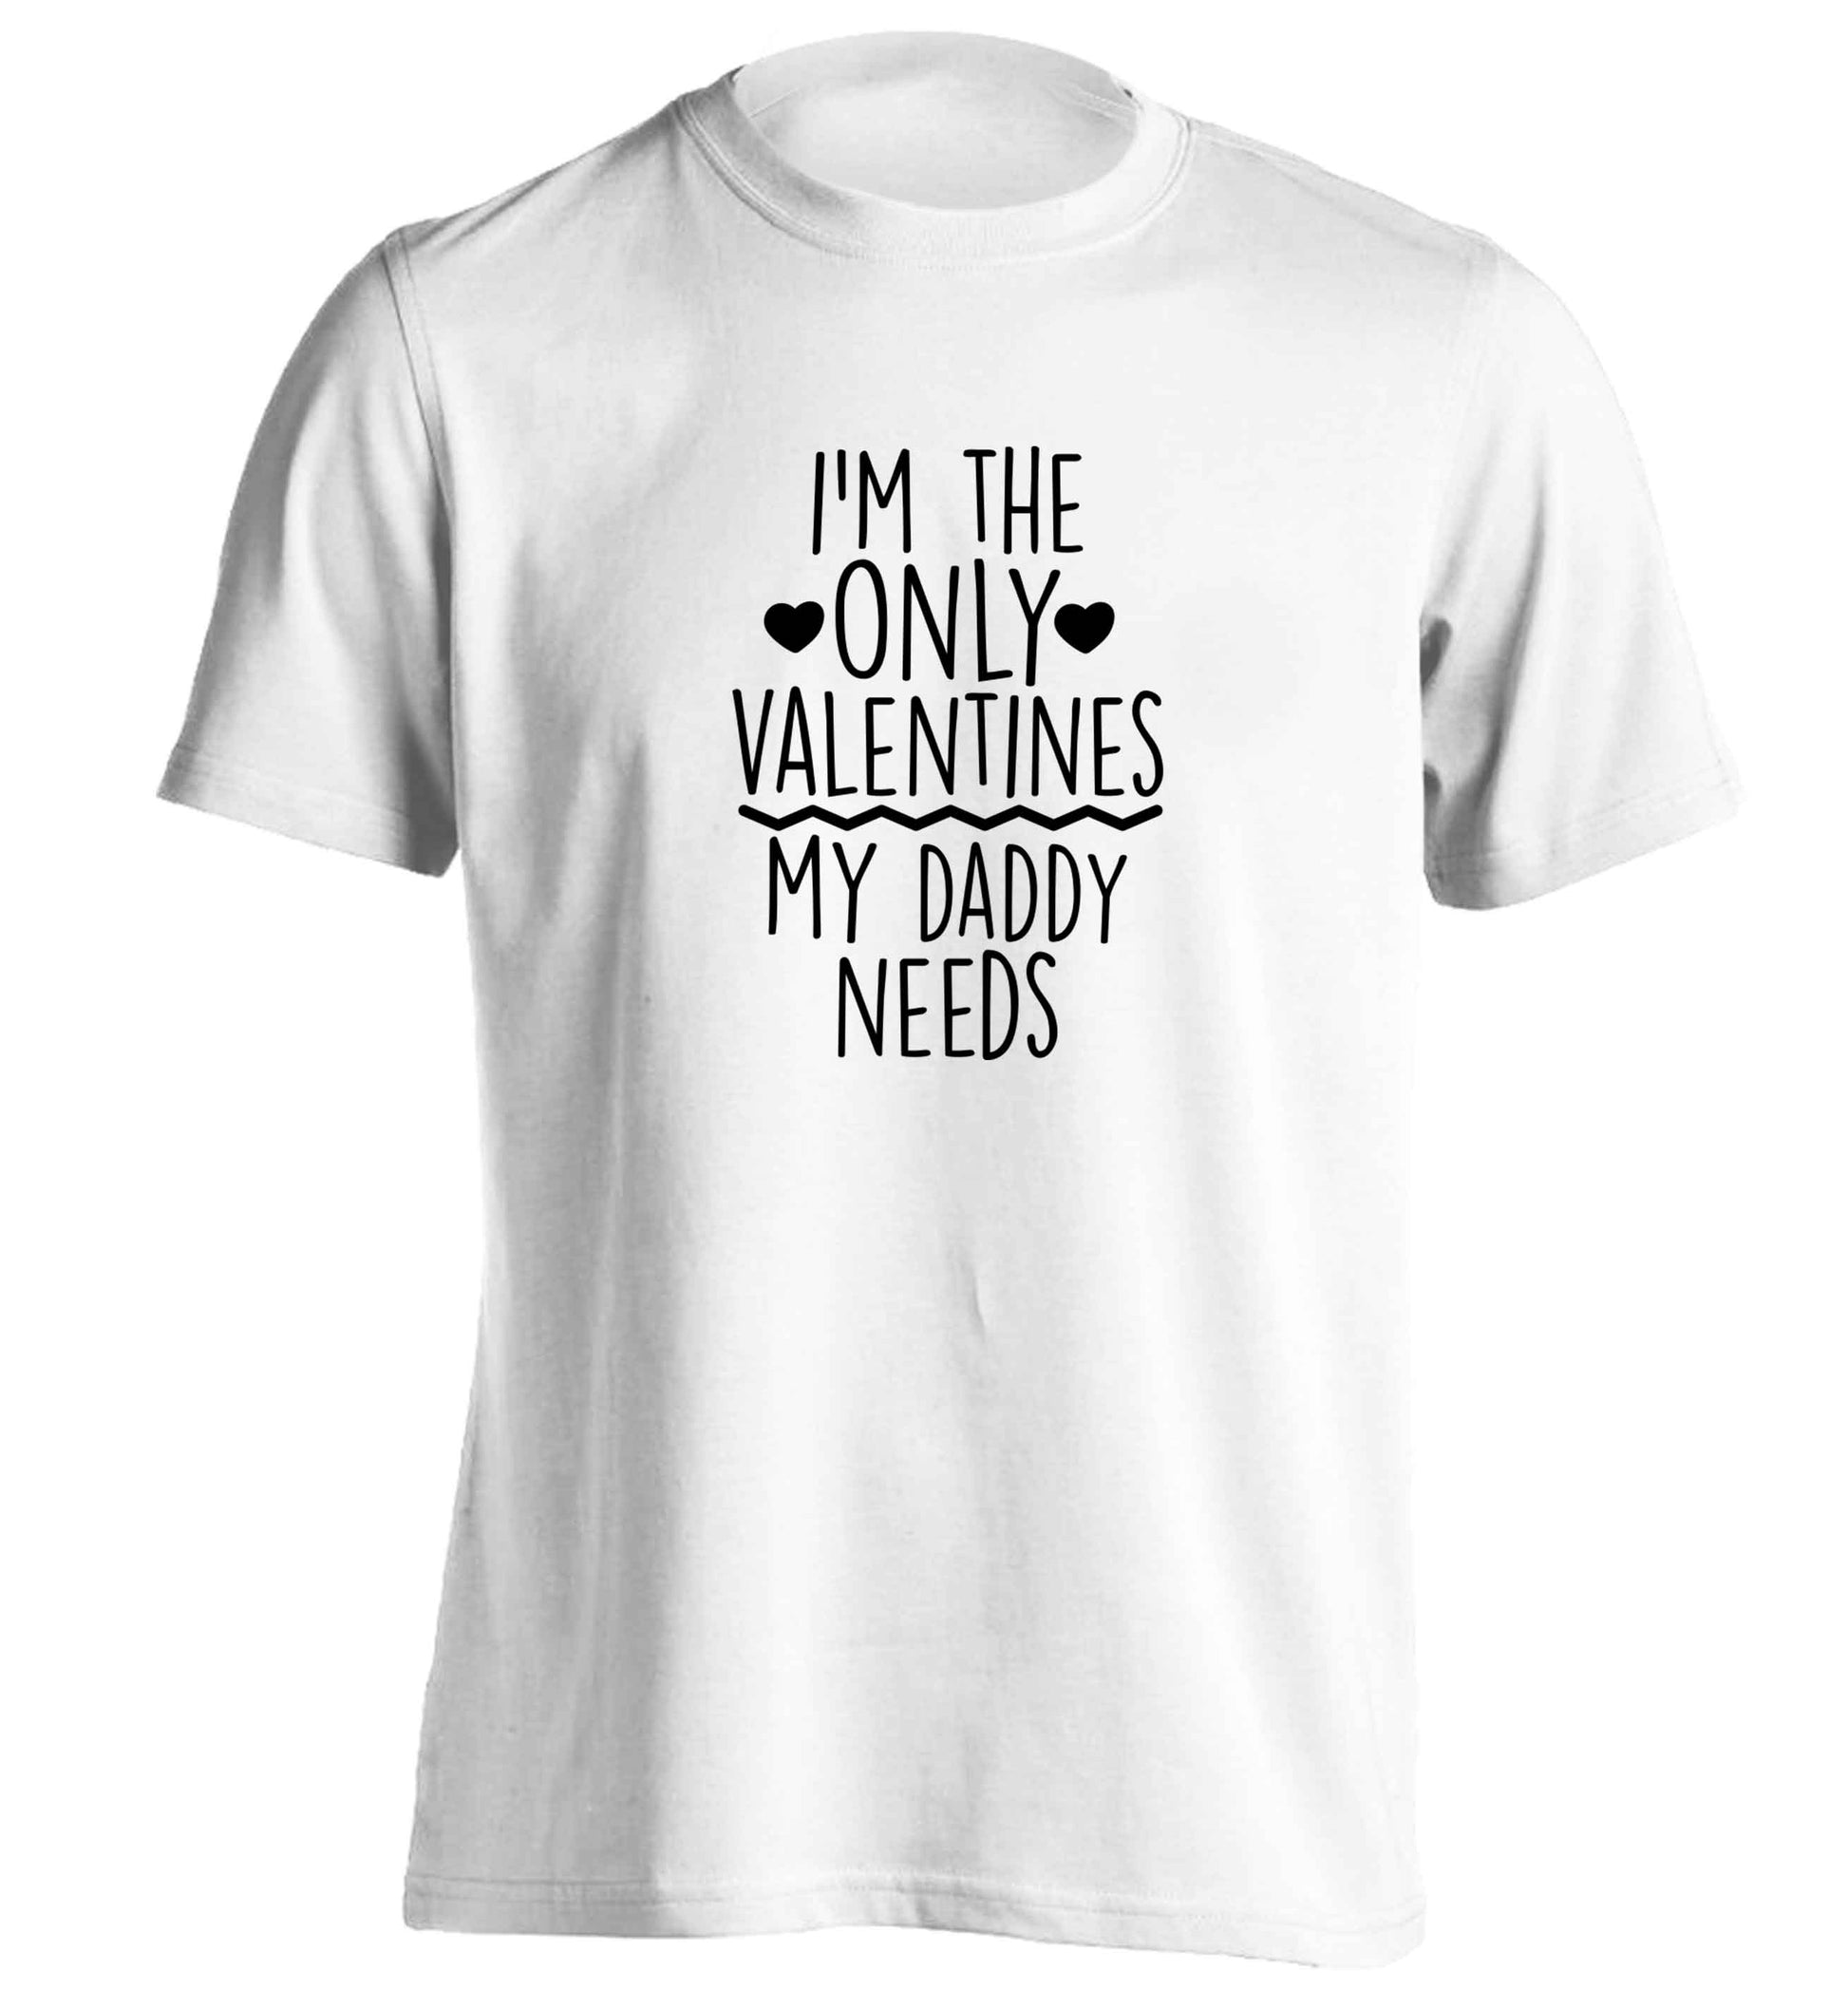 I'm the only valentines my daddy needs adults unisex white Tshirt 2XL